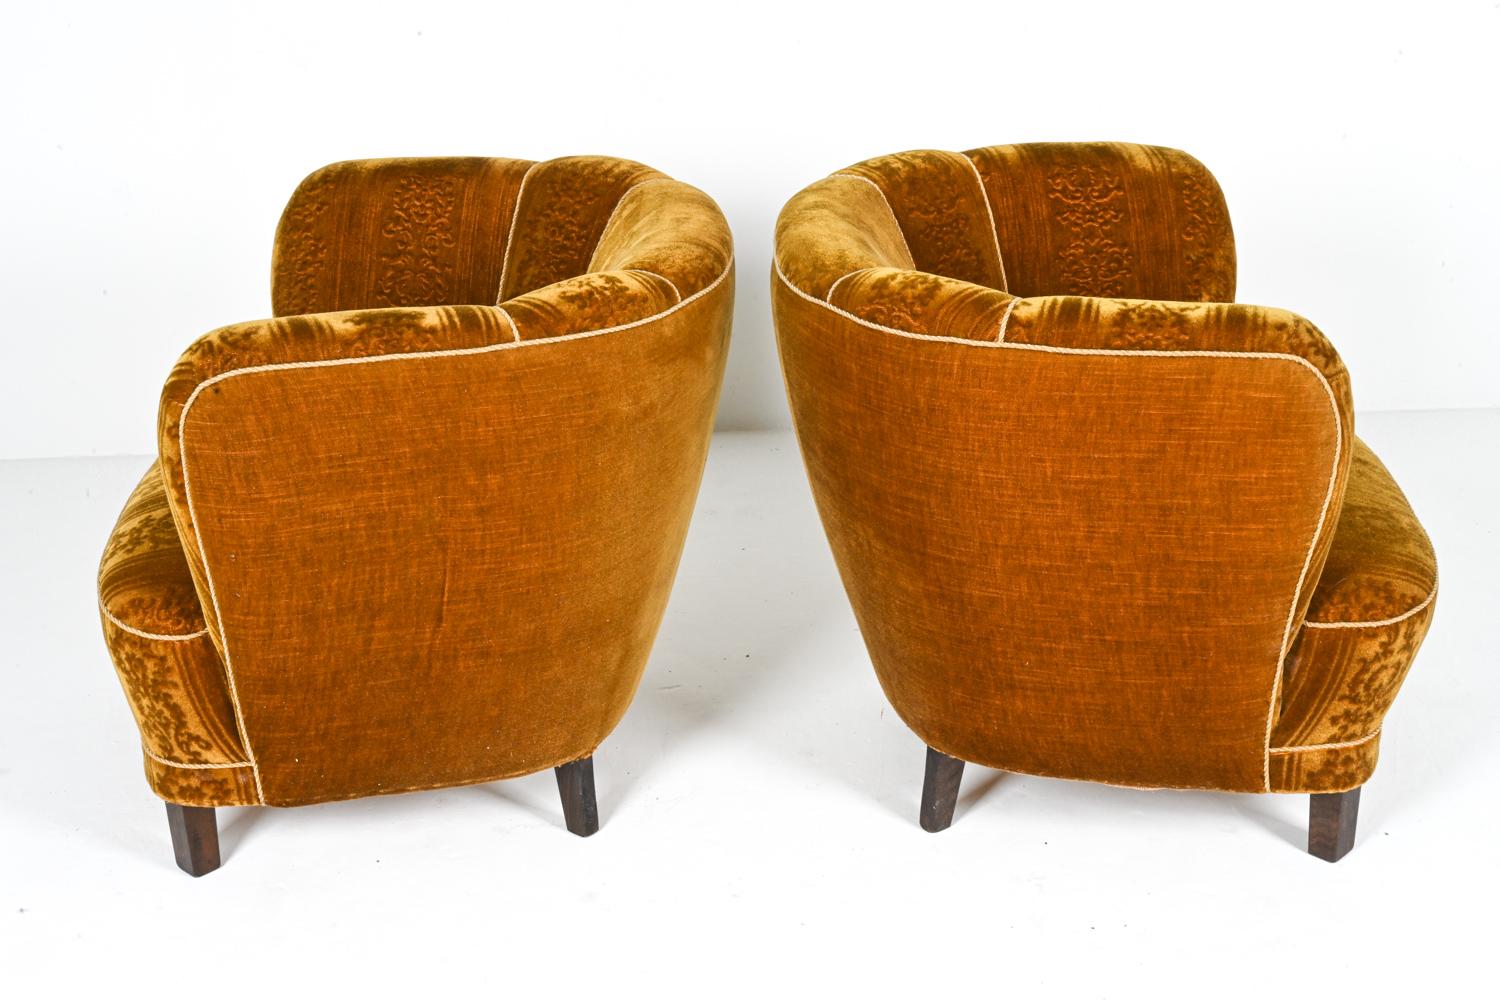 Pair of Manner of Viggo Boesen Lounge Chairs by Slagelse, c. 1940's For Sale 3